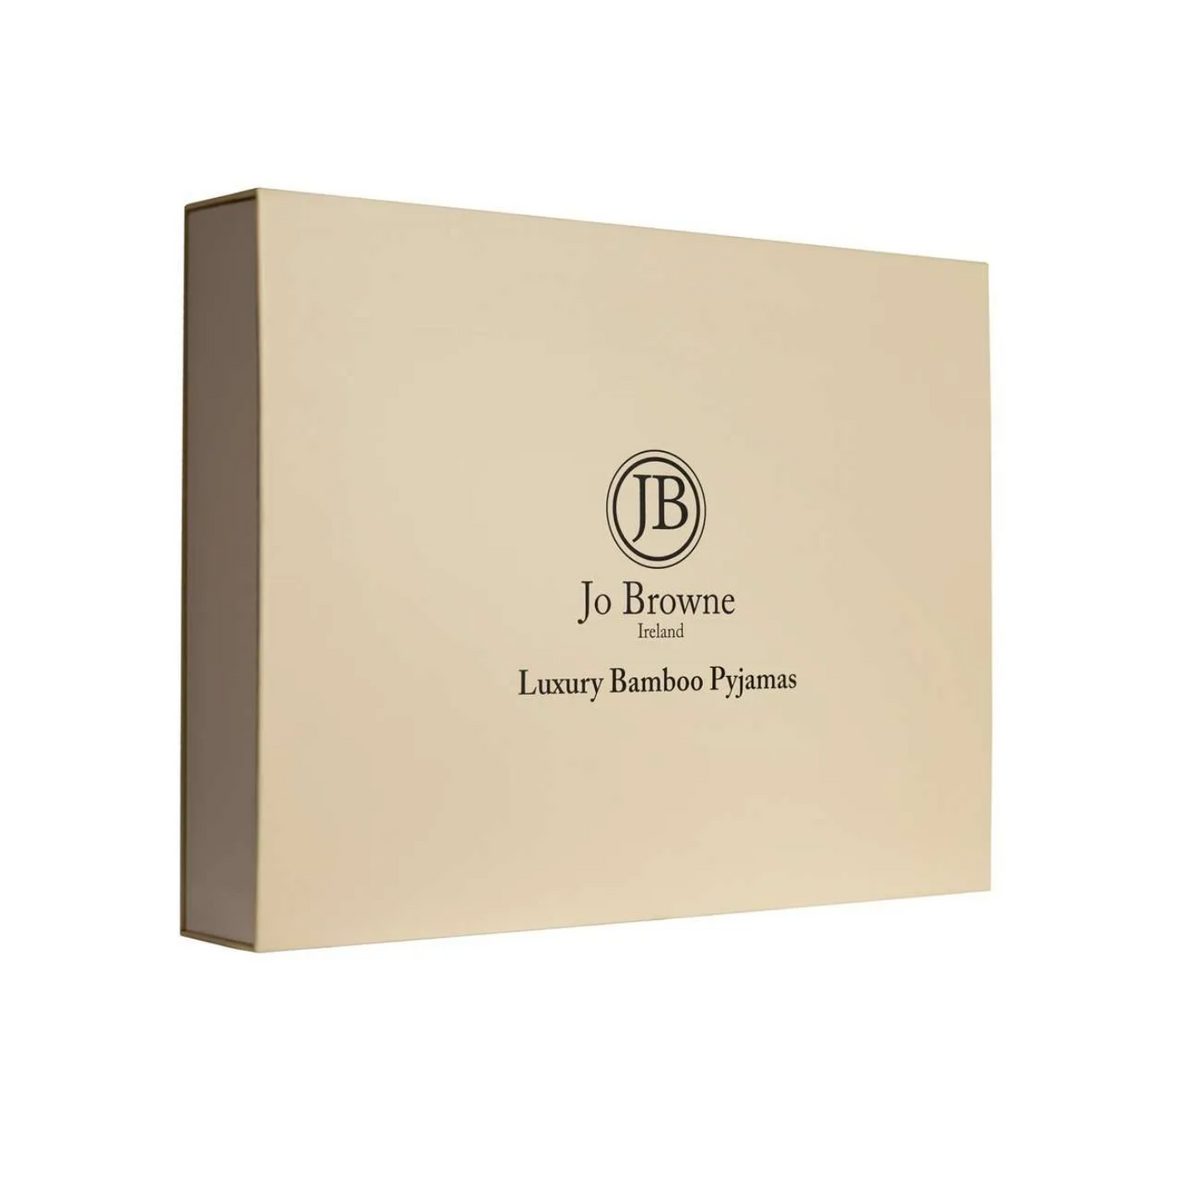 A product shot of the Gift Box that comes with the Jo Browne Luxury Unisex Bamboo Pyjamas.